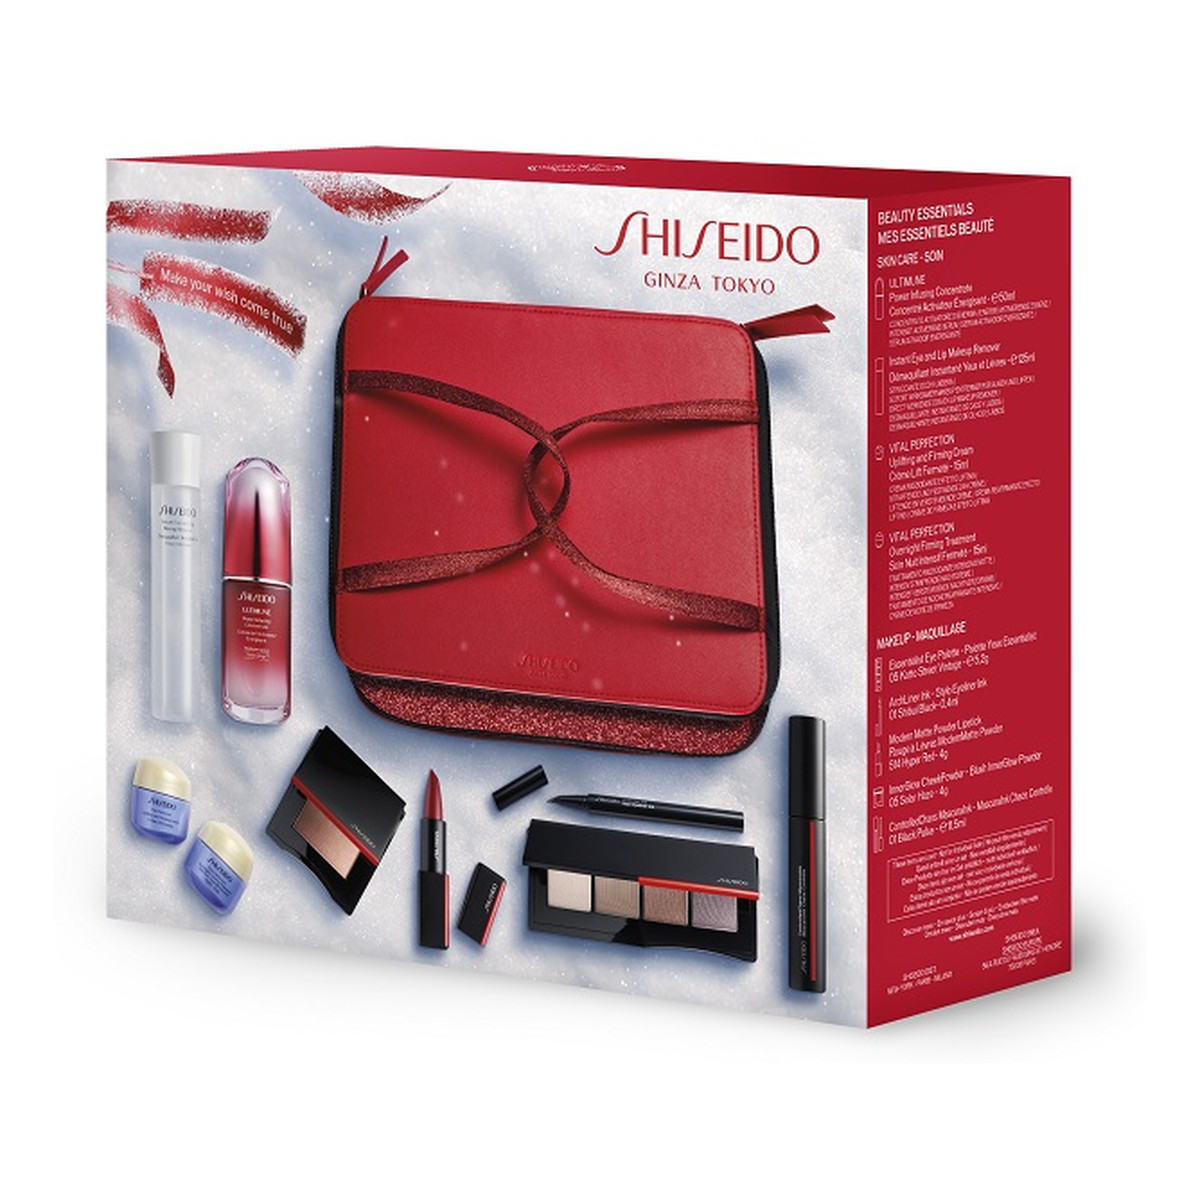 Shiseido Beauty Essentials Zestaw color makeup 5szt + ultimune power infusing concentrate 50ml + instant eye and lip makeup remover 125ml + vital perfection 2x15ml + kosmetyczka